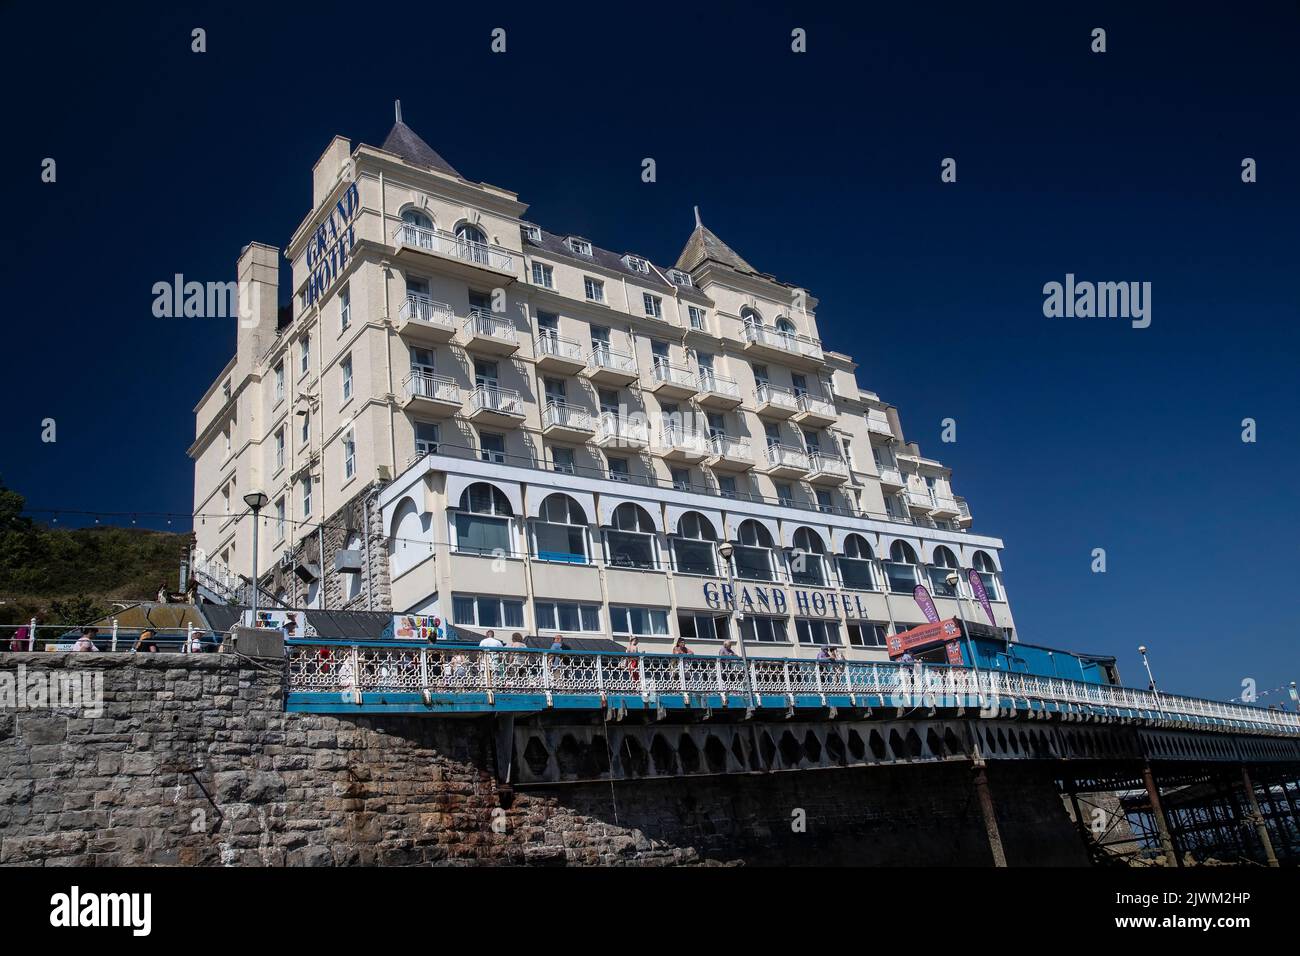 An unusual view of Llandudno's Grand Hotel taken from the landing stage jetty on the North Shore beach Stock Photo